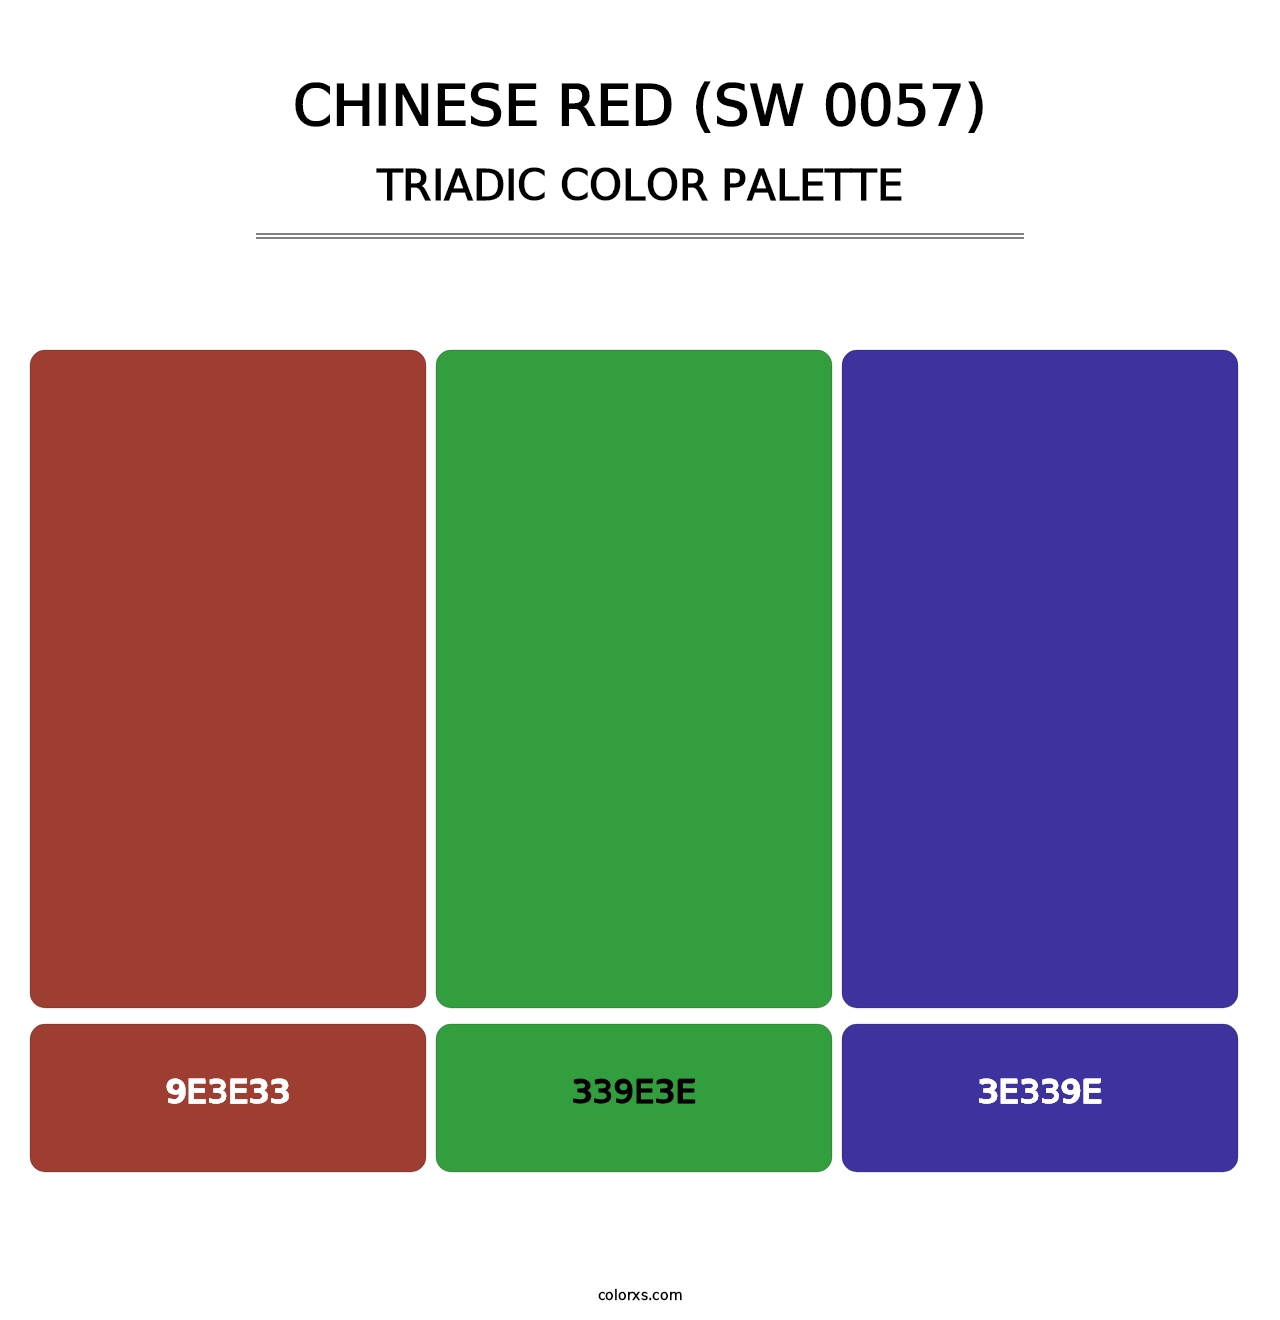 Chinese Red (SW 0057) - Triadic Color Palette